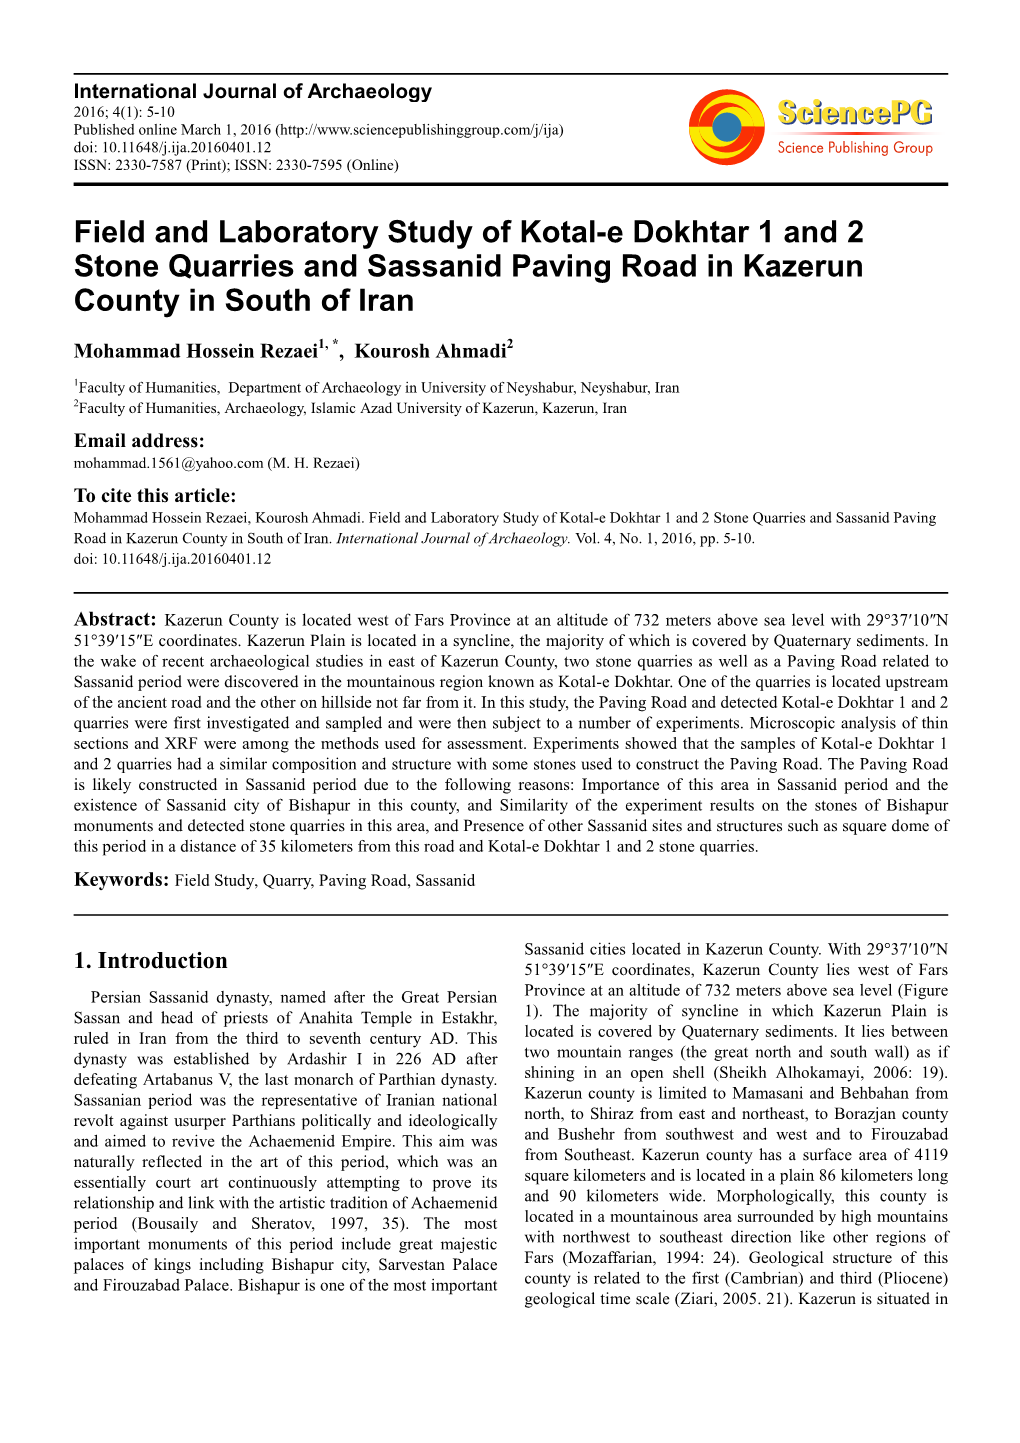 Field and Laboratory Study of Kotal-E Dokhtar 1 and 2 Stone Quarries and Sassanid Paving Road in Kazerun County in South of Iran